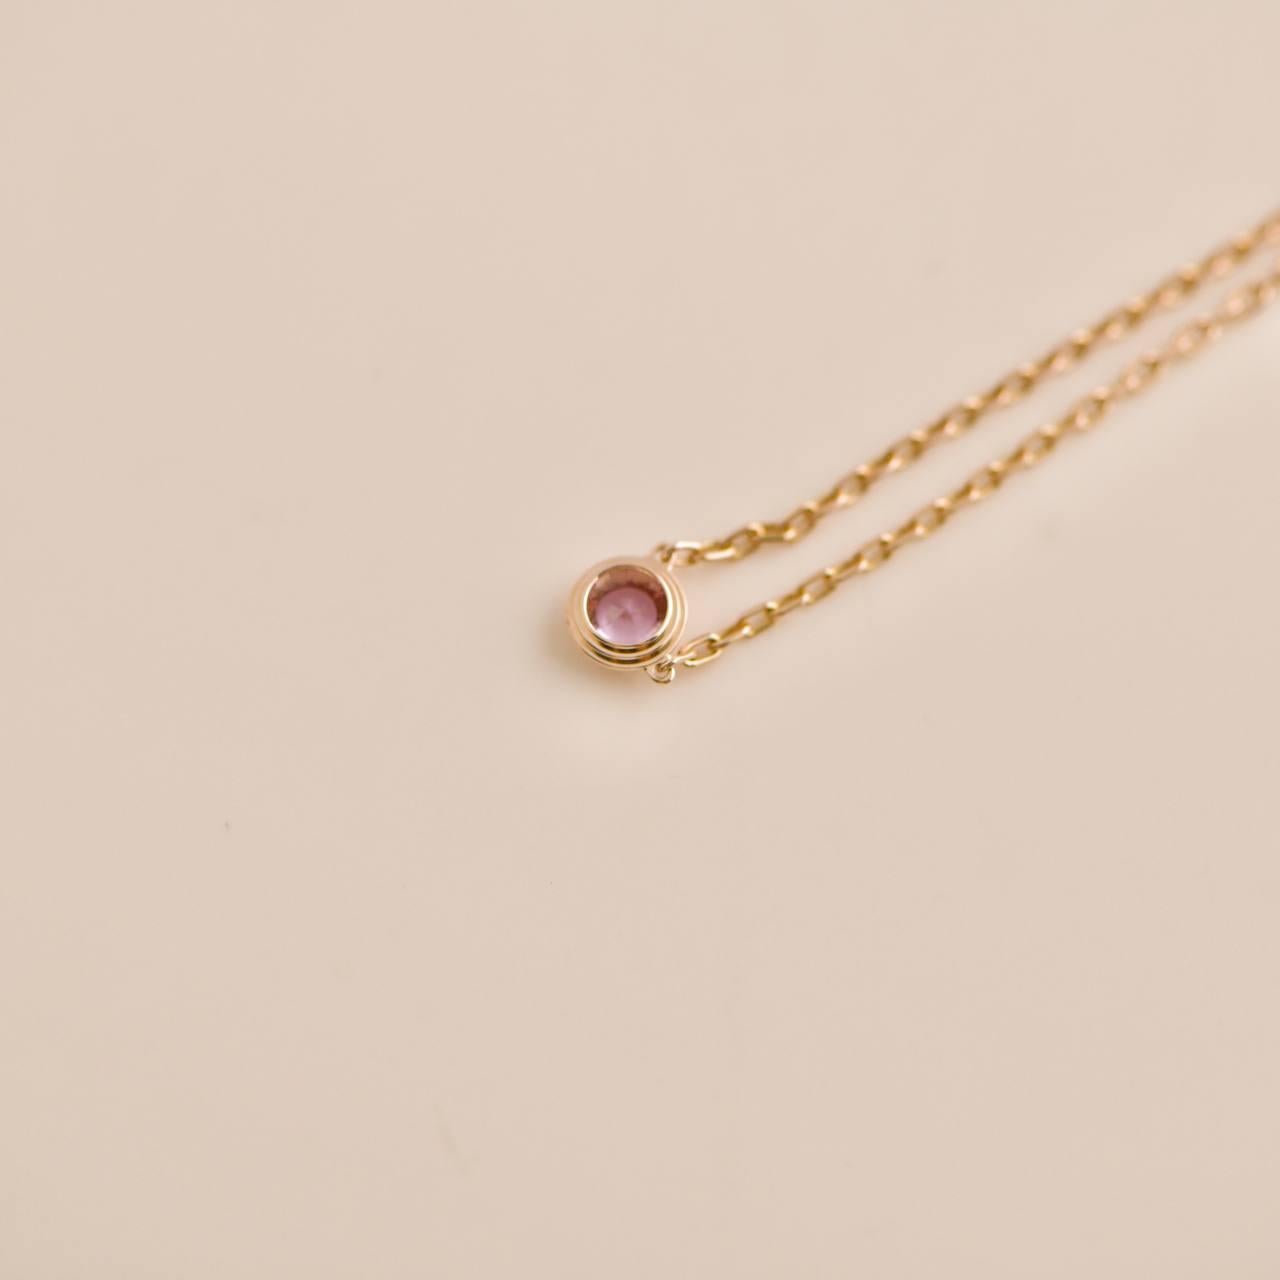 Cartier D'AMOUR 18K Rose Gold Pink Sapphire Pendant Necklace In Excellent Condition For Sale In Banbury, GB